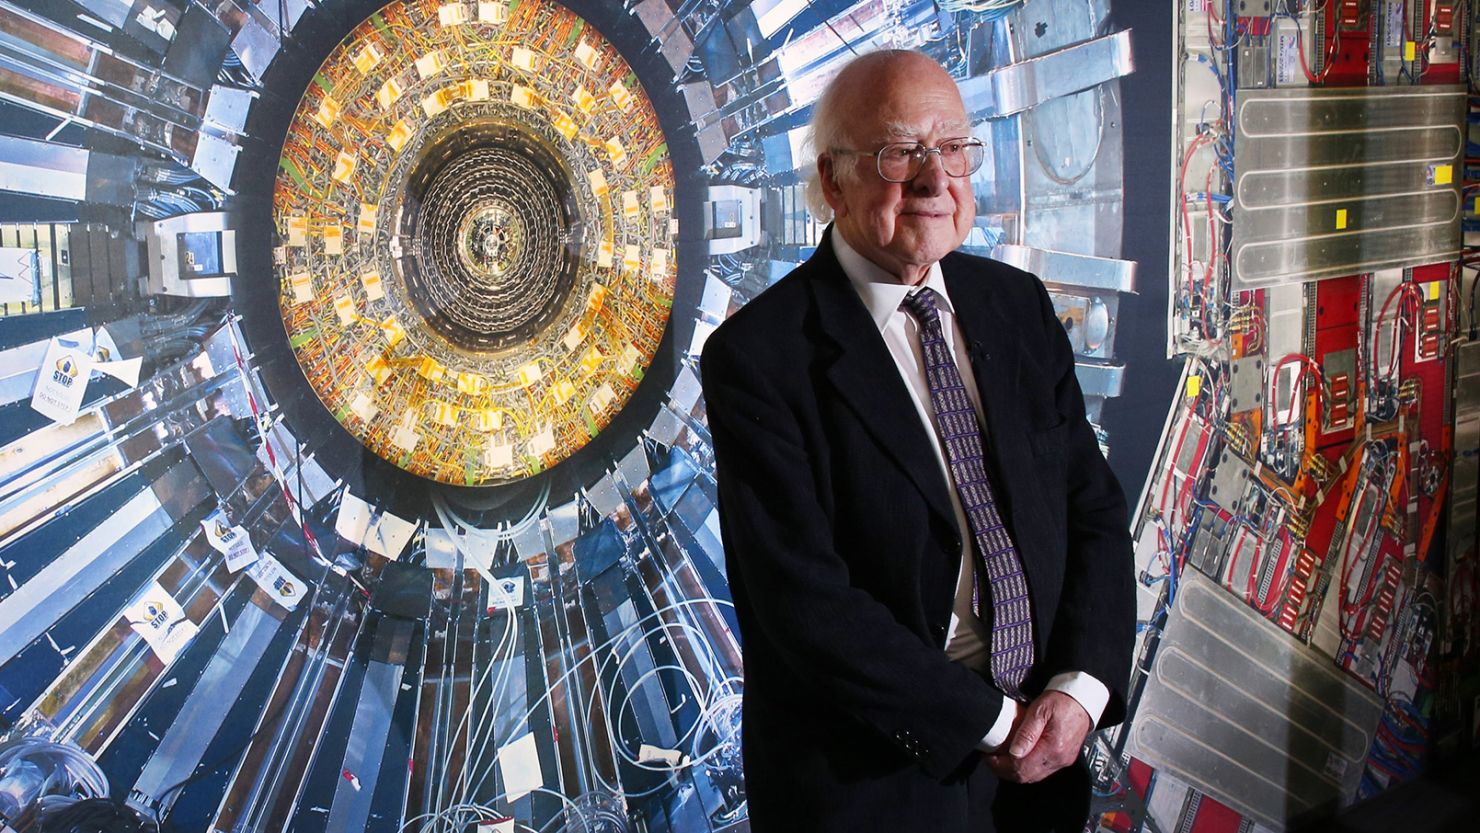 The late physicist Peter Higgs stands in front of a photograph of the Large Hadron Collider at the Science Museum's "Collider" exhibition in November 2013, in London.